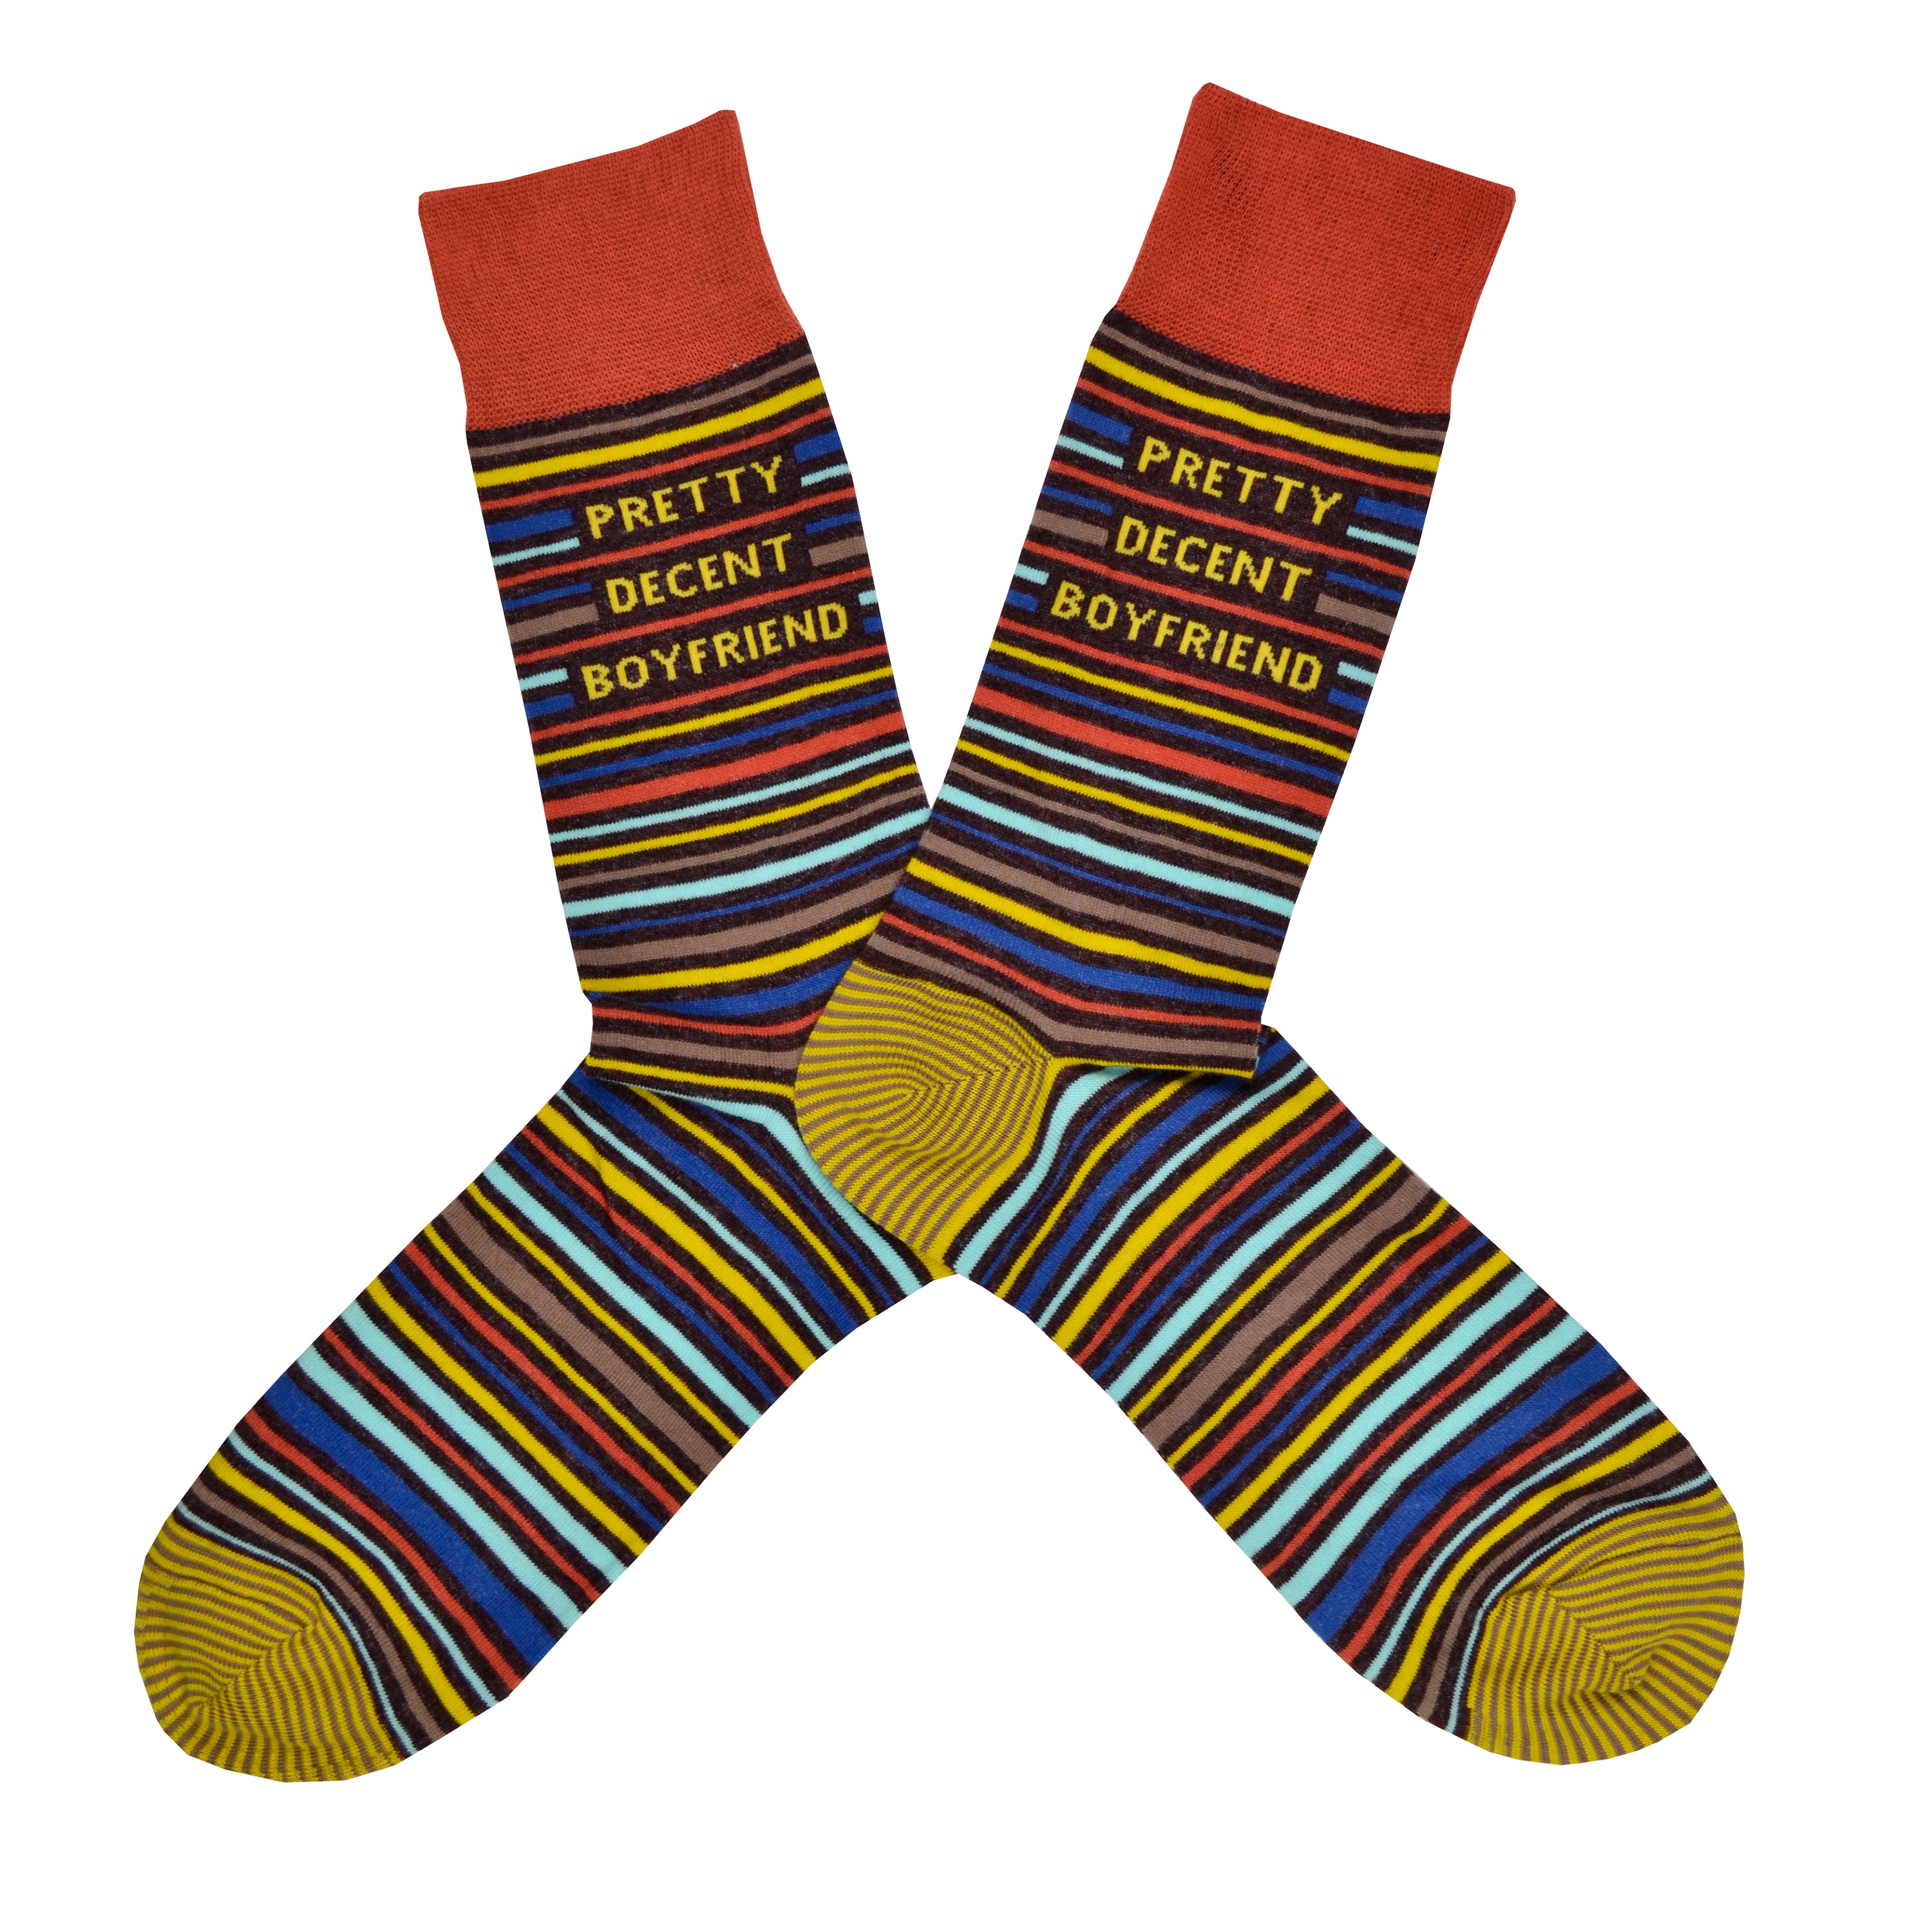 These blue, yellow, orange, brown and gray thinly striped men's novelty crew socks with an orange cuff by the brand Blue Q feature the words 